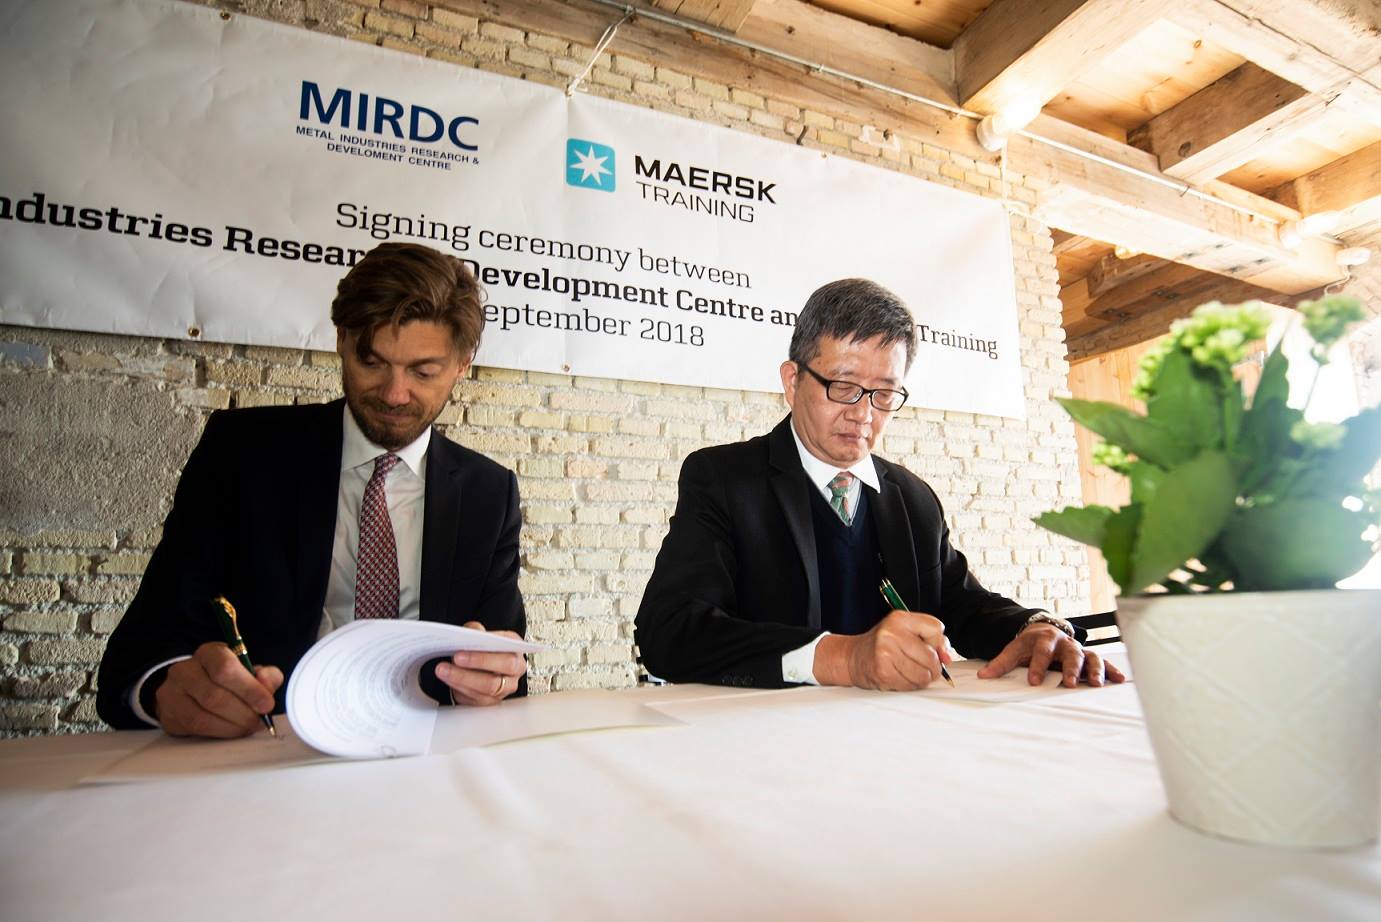 Maersk Training and MIRDC to Open New Program in Taiwan